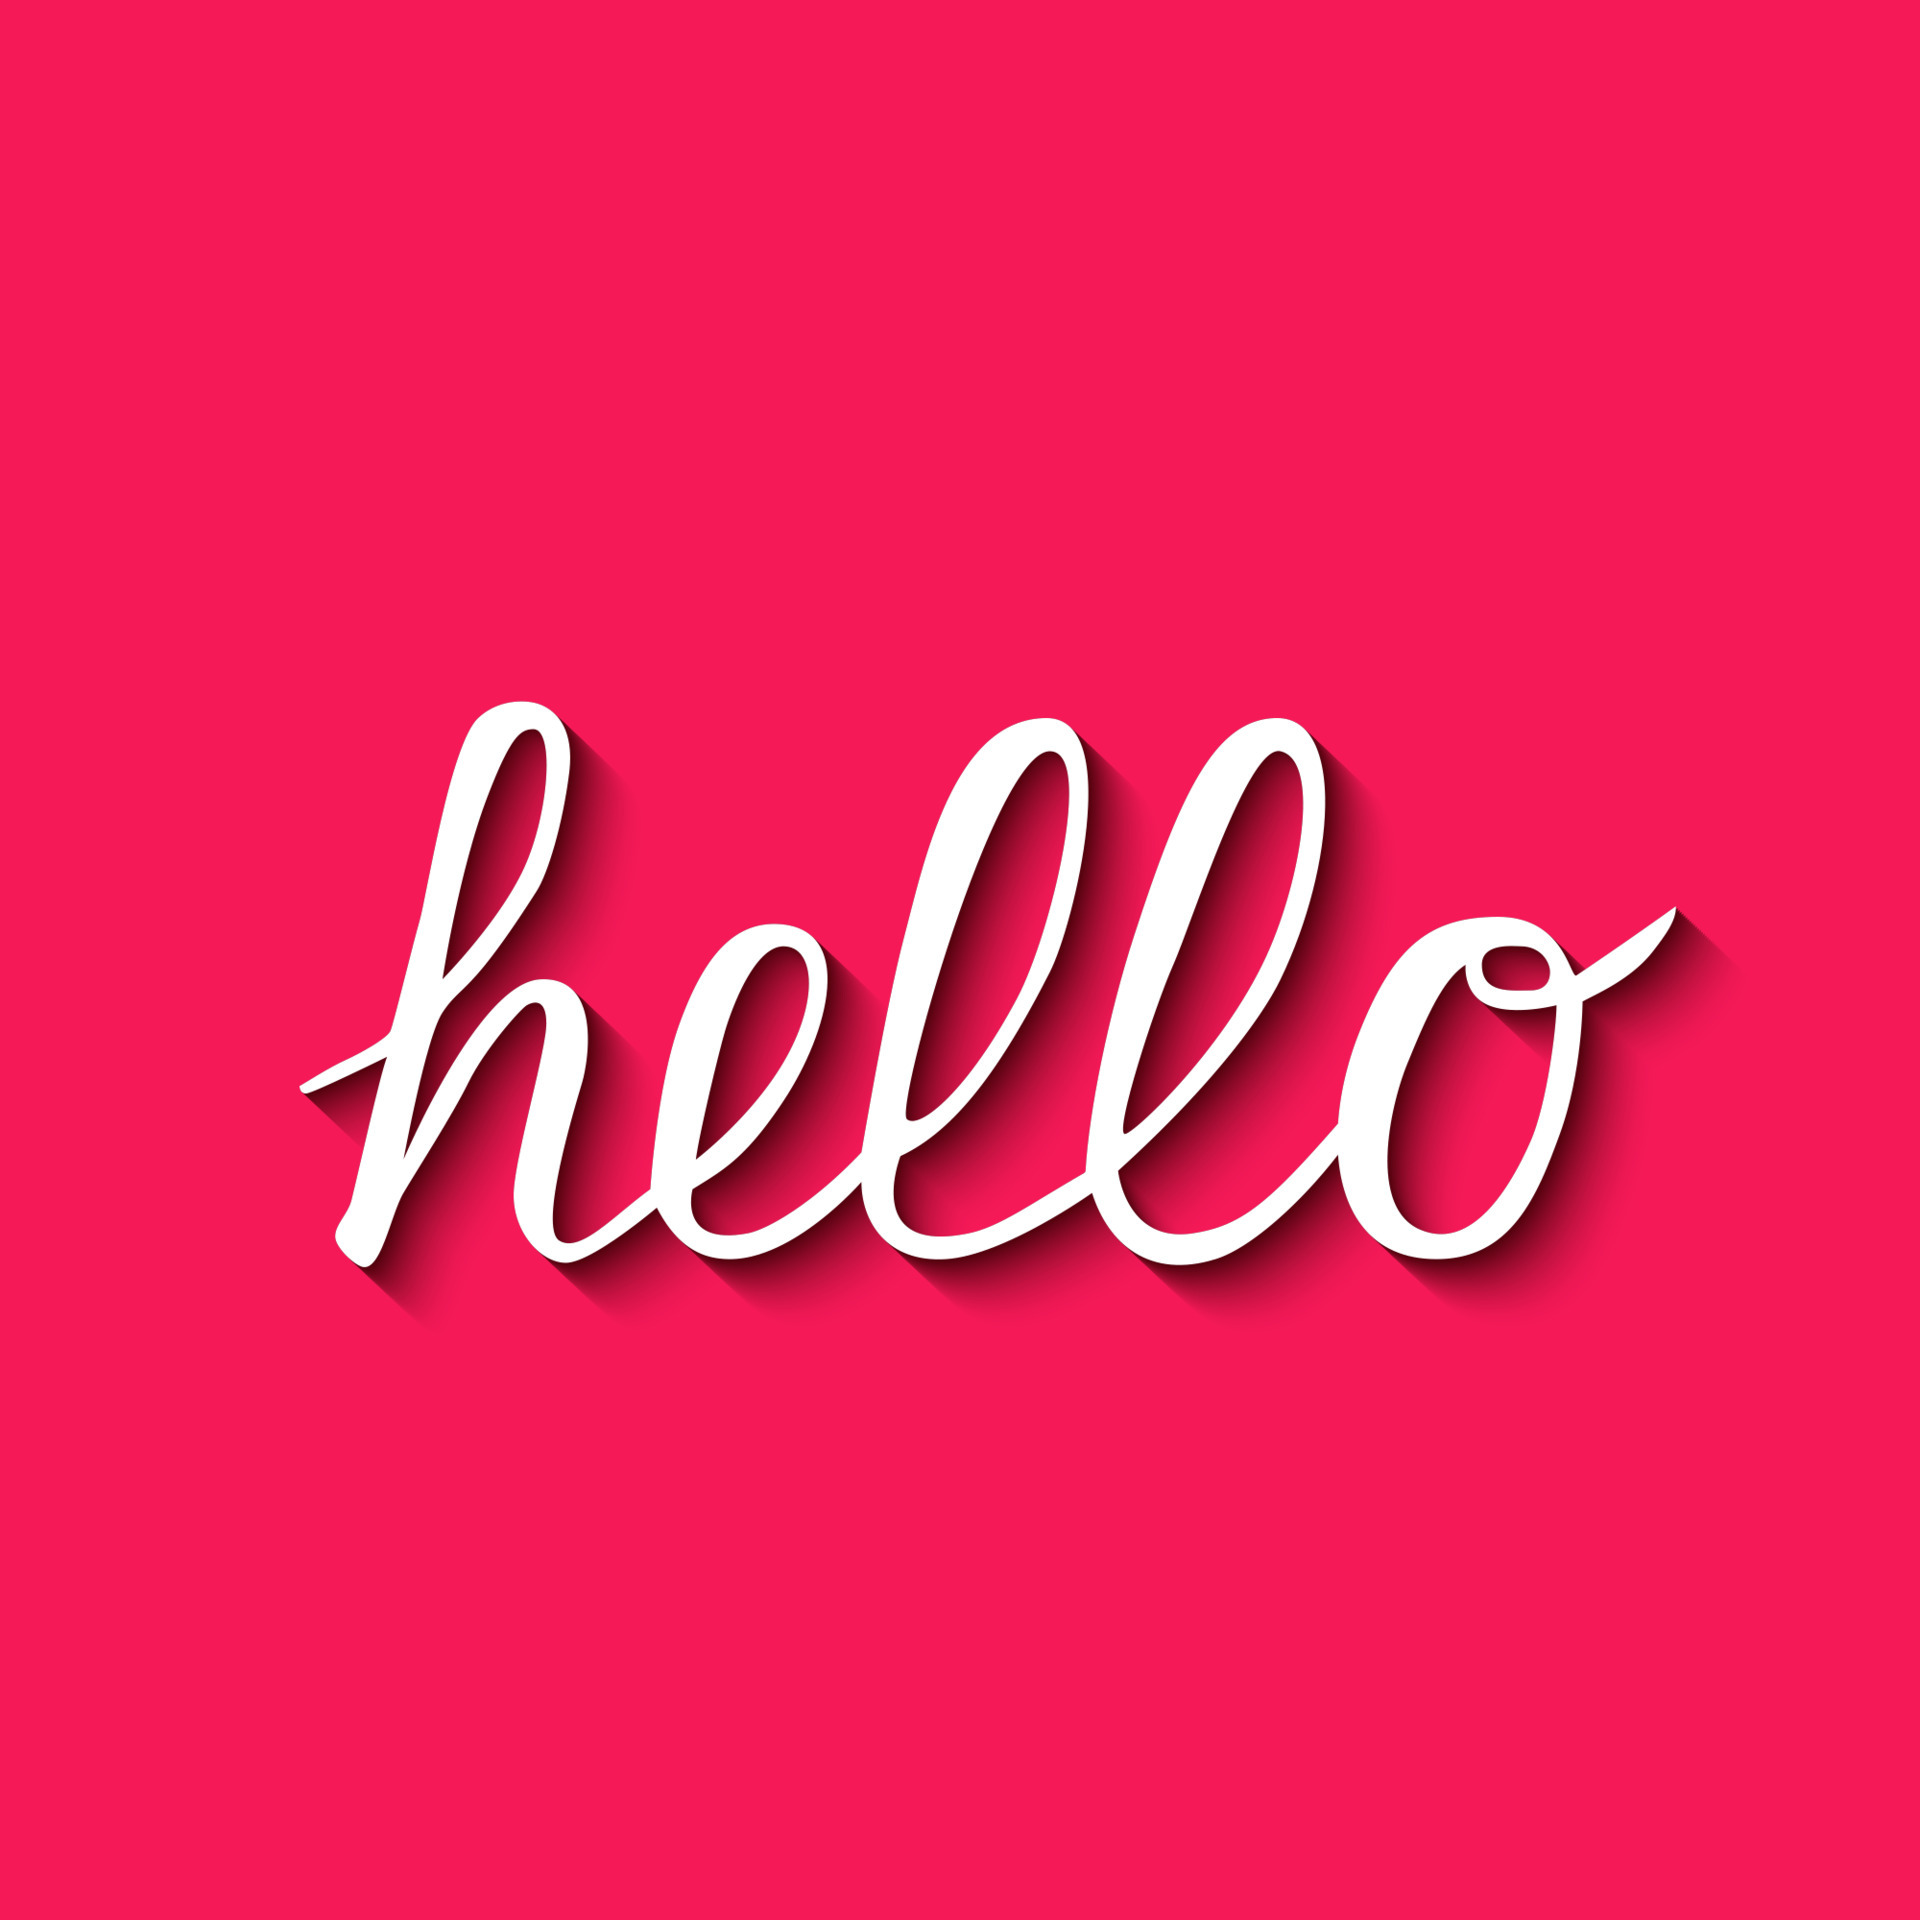 Hello calligraphy lettering on hot pink background. Hand drawn